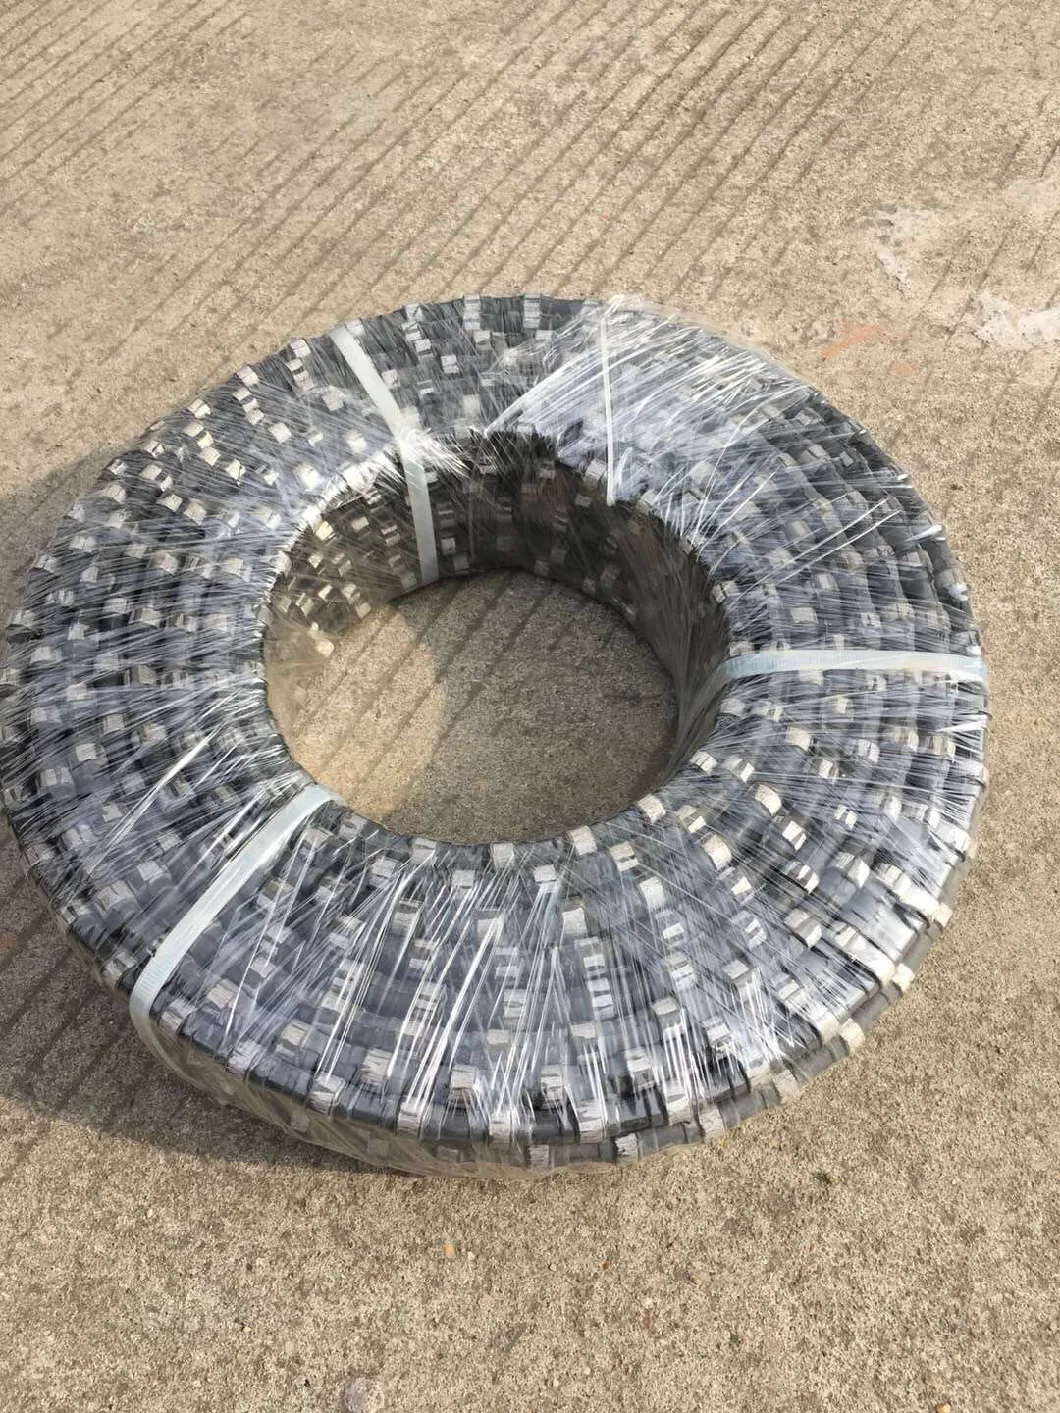 Diamond Wire Saw Mining Rope Saw for Cutting Granite Marble Stone Cutting Saw Profiling and Squaring